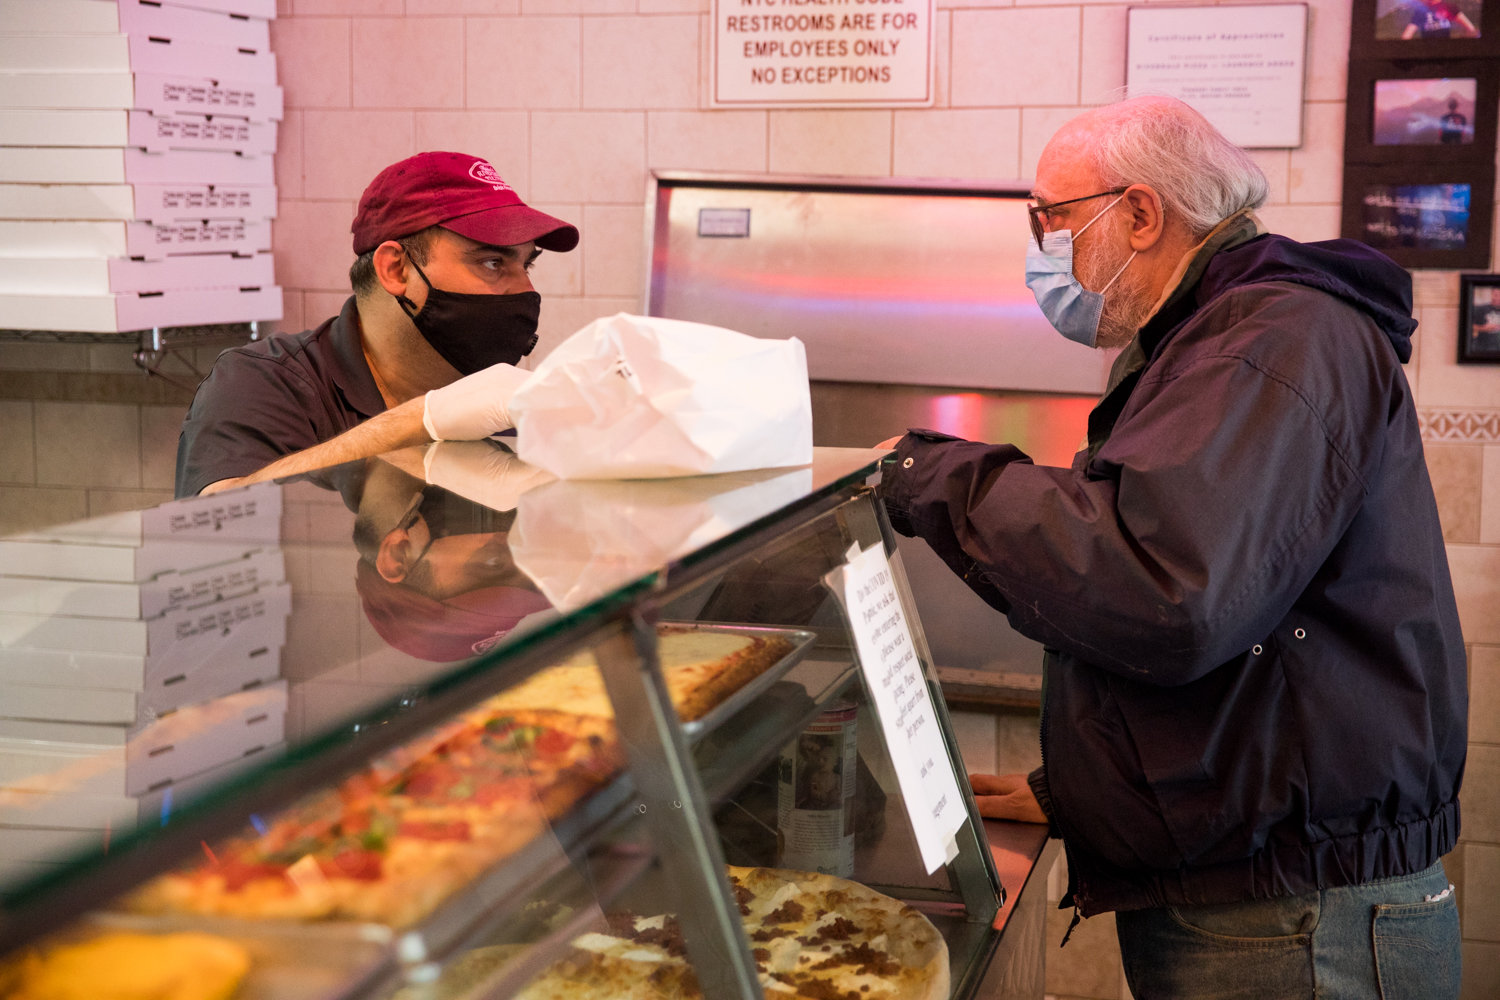 Jody DePasquale, manager of Addeo’s Riverdale Pizza, left, talks with a customer while filling his order. The North Riverdale pizza place has met the challenge posed by the coronavirus pandemic, managing to stay open. DePasquale and his workers have gone to greater lengths to help the community by running errands for customers.